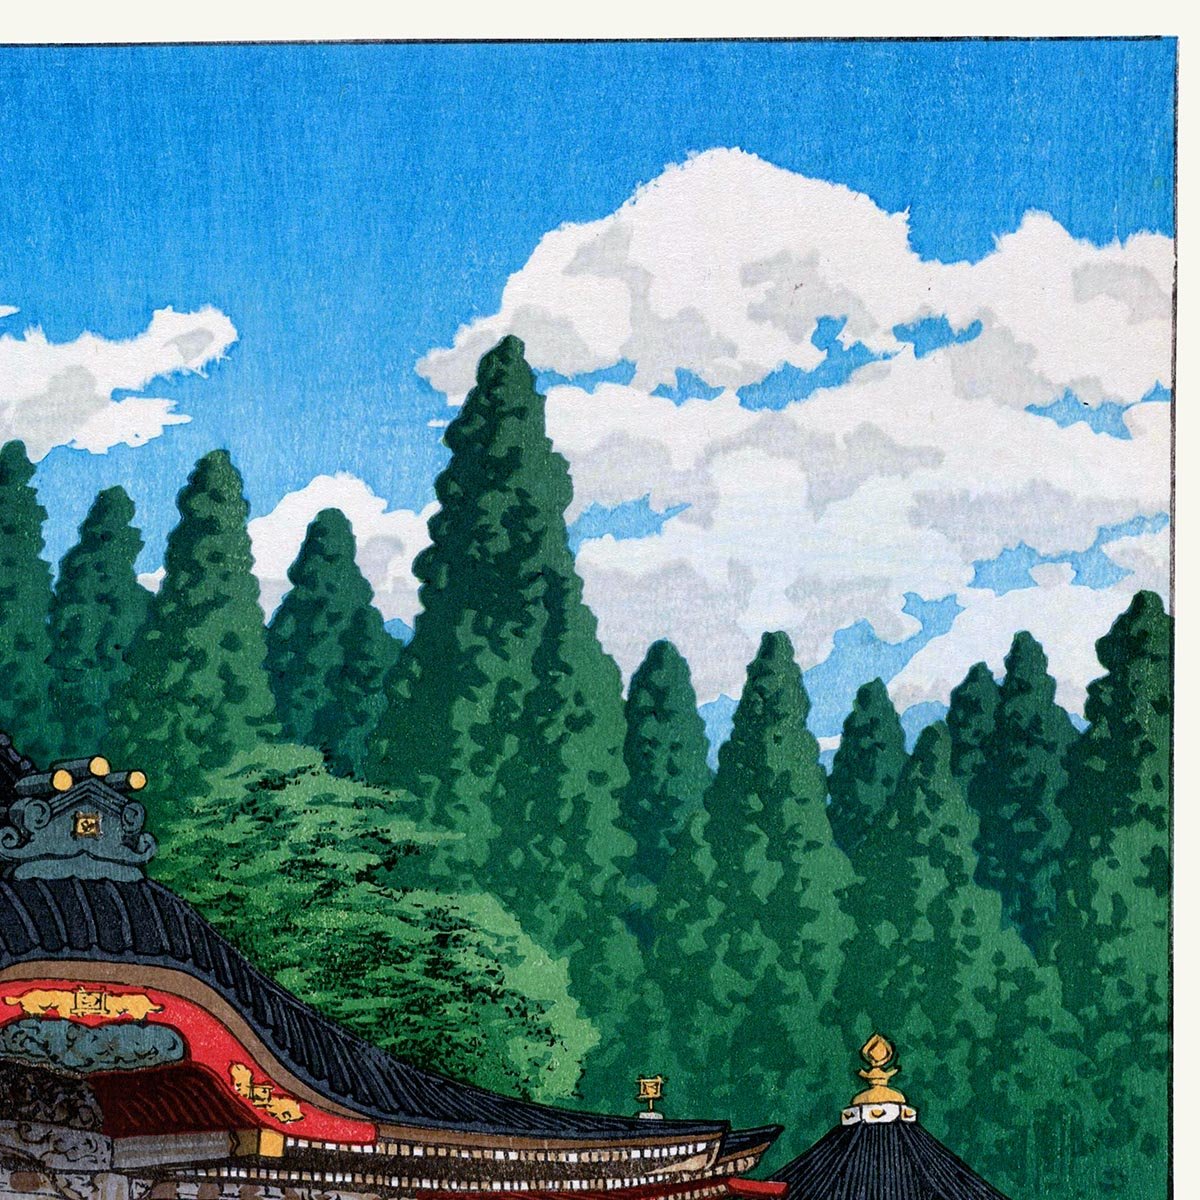 Red Temple by Hasui